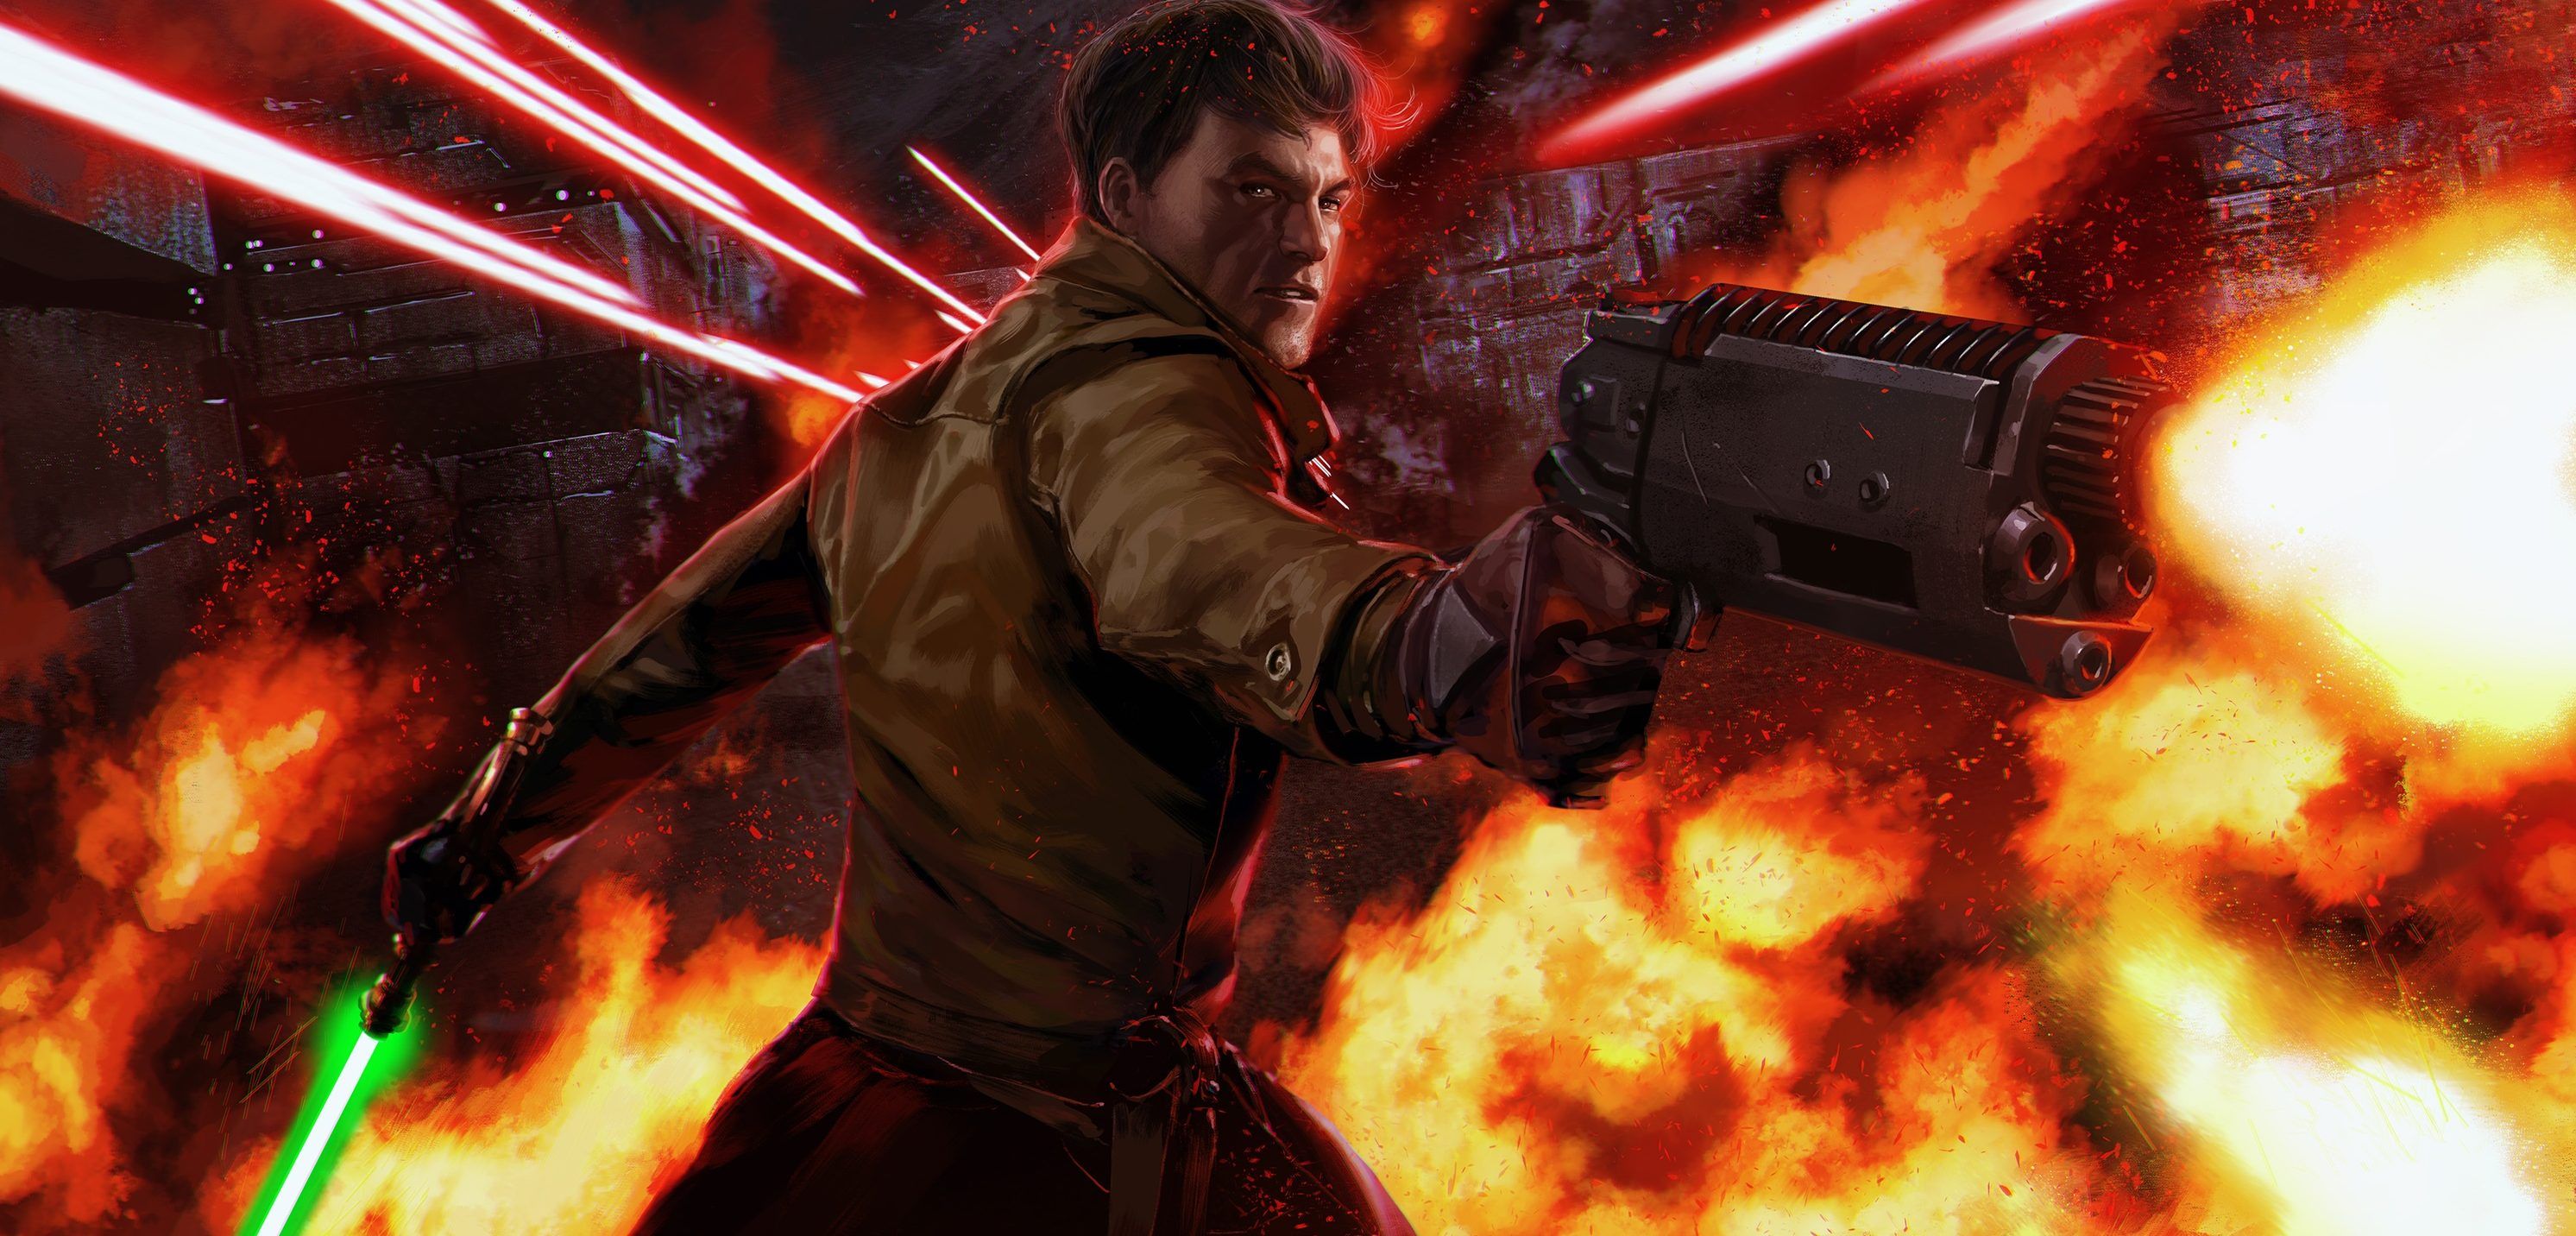 Kyle Katarn pointing a blaster offscreen, holding a green lightsaber in his left had as plasma bolts and fire burst from the background. 